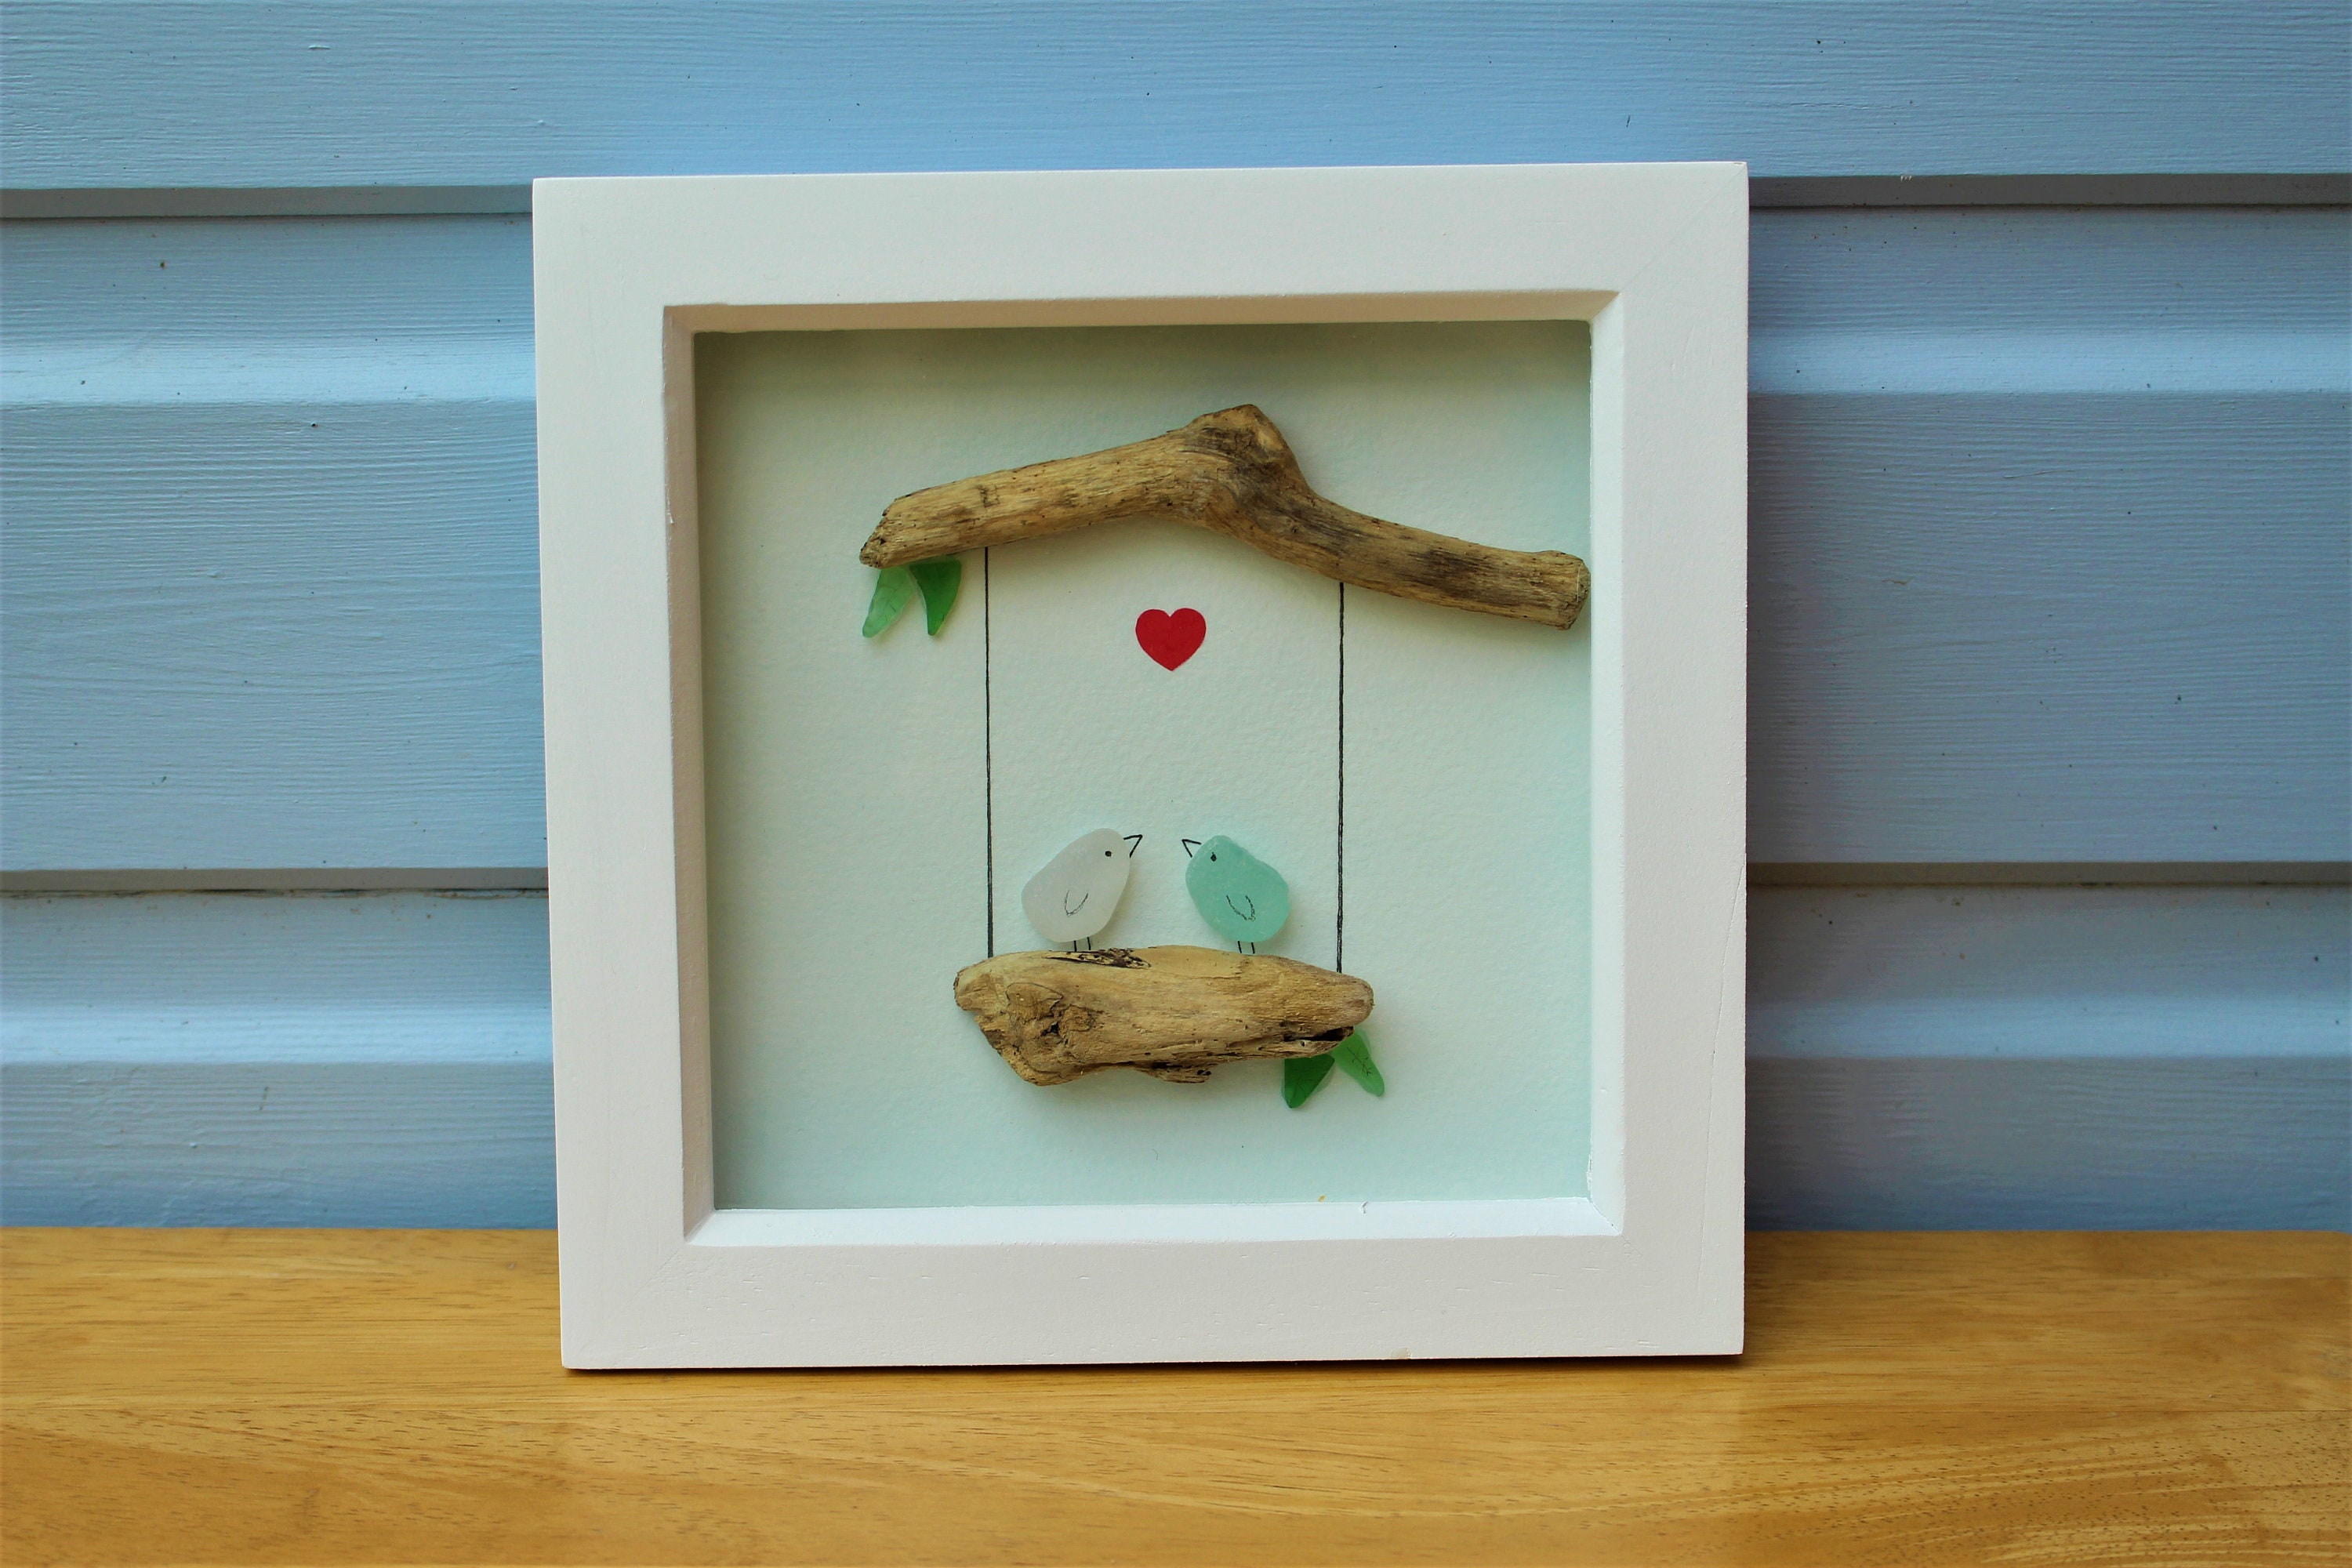 Details about   AMAZING Genuine Sea Glass & Driftwood Birds Picture Framed From Sorrento Italy 